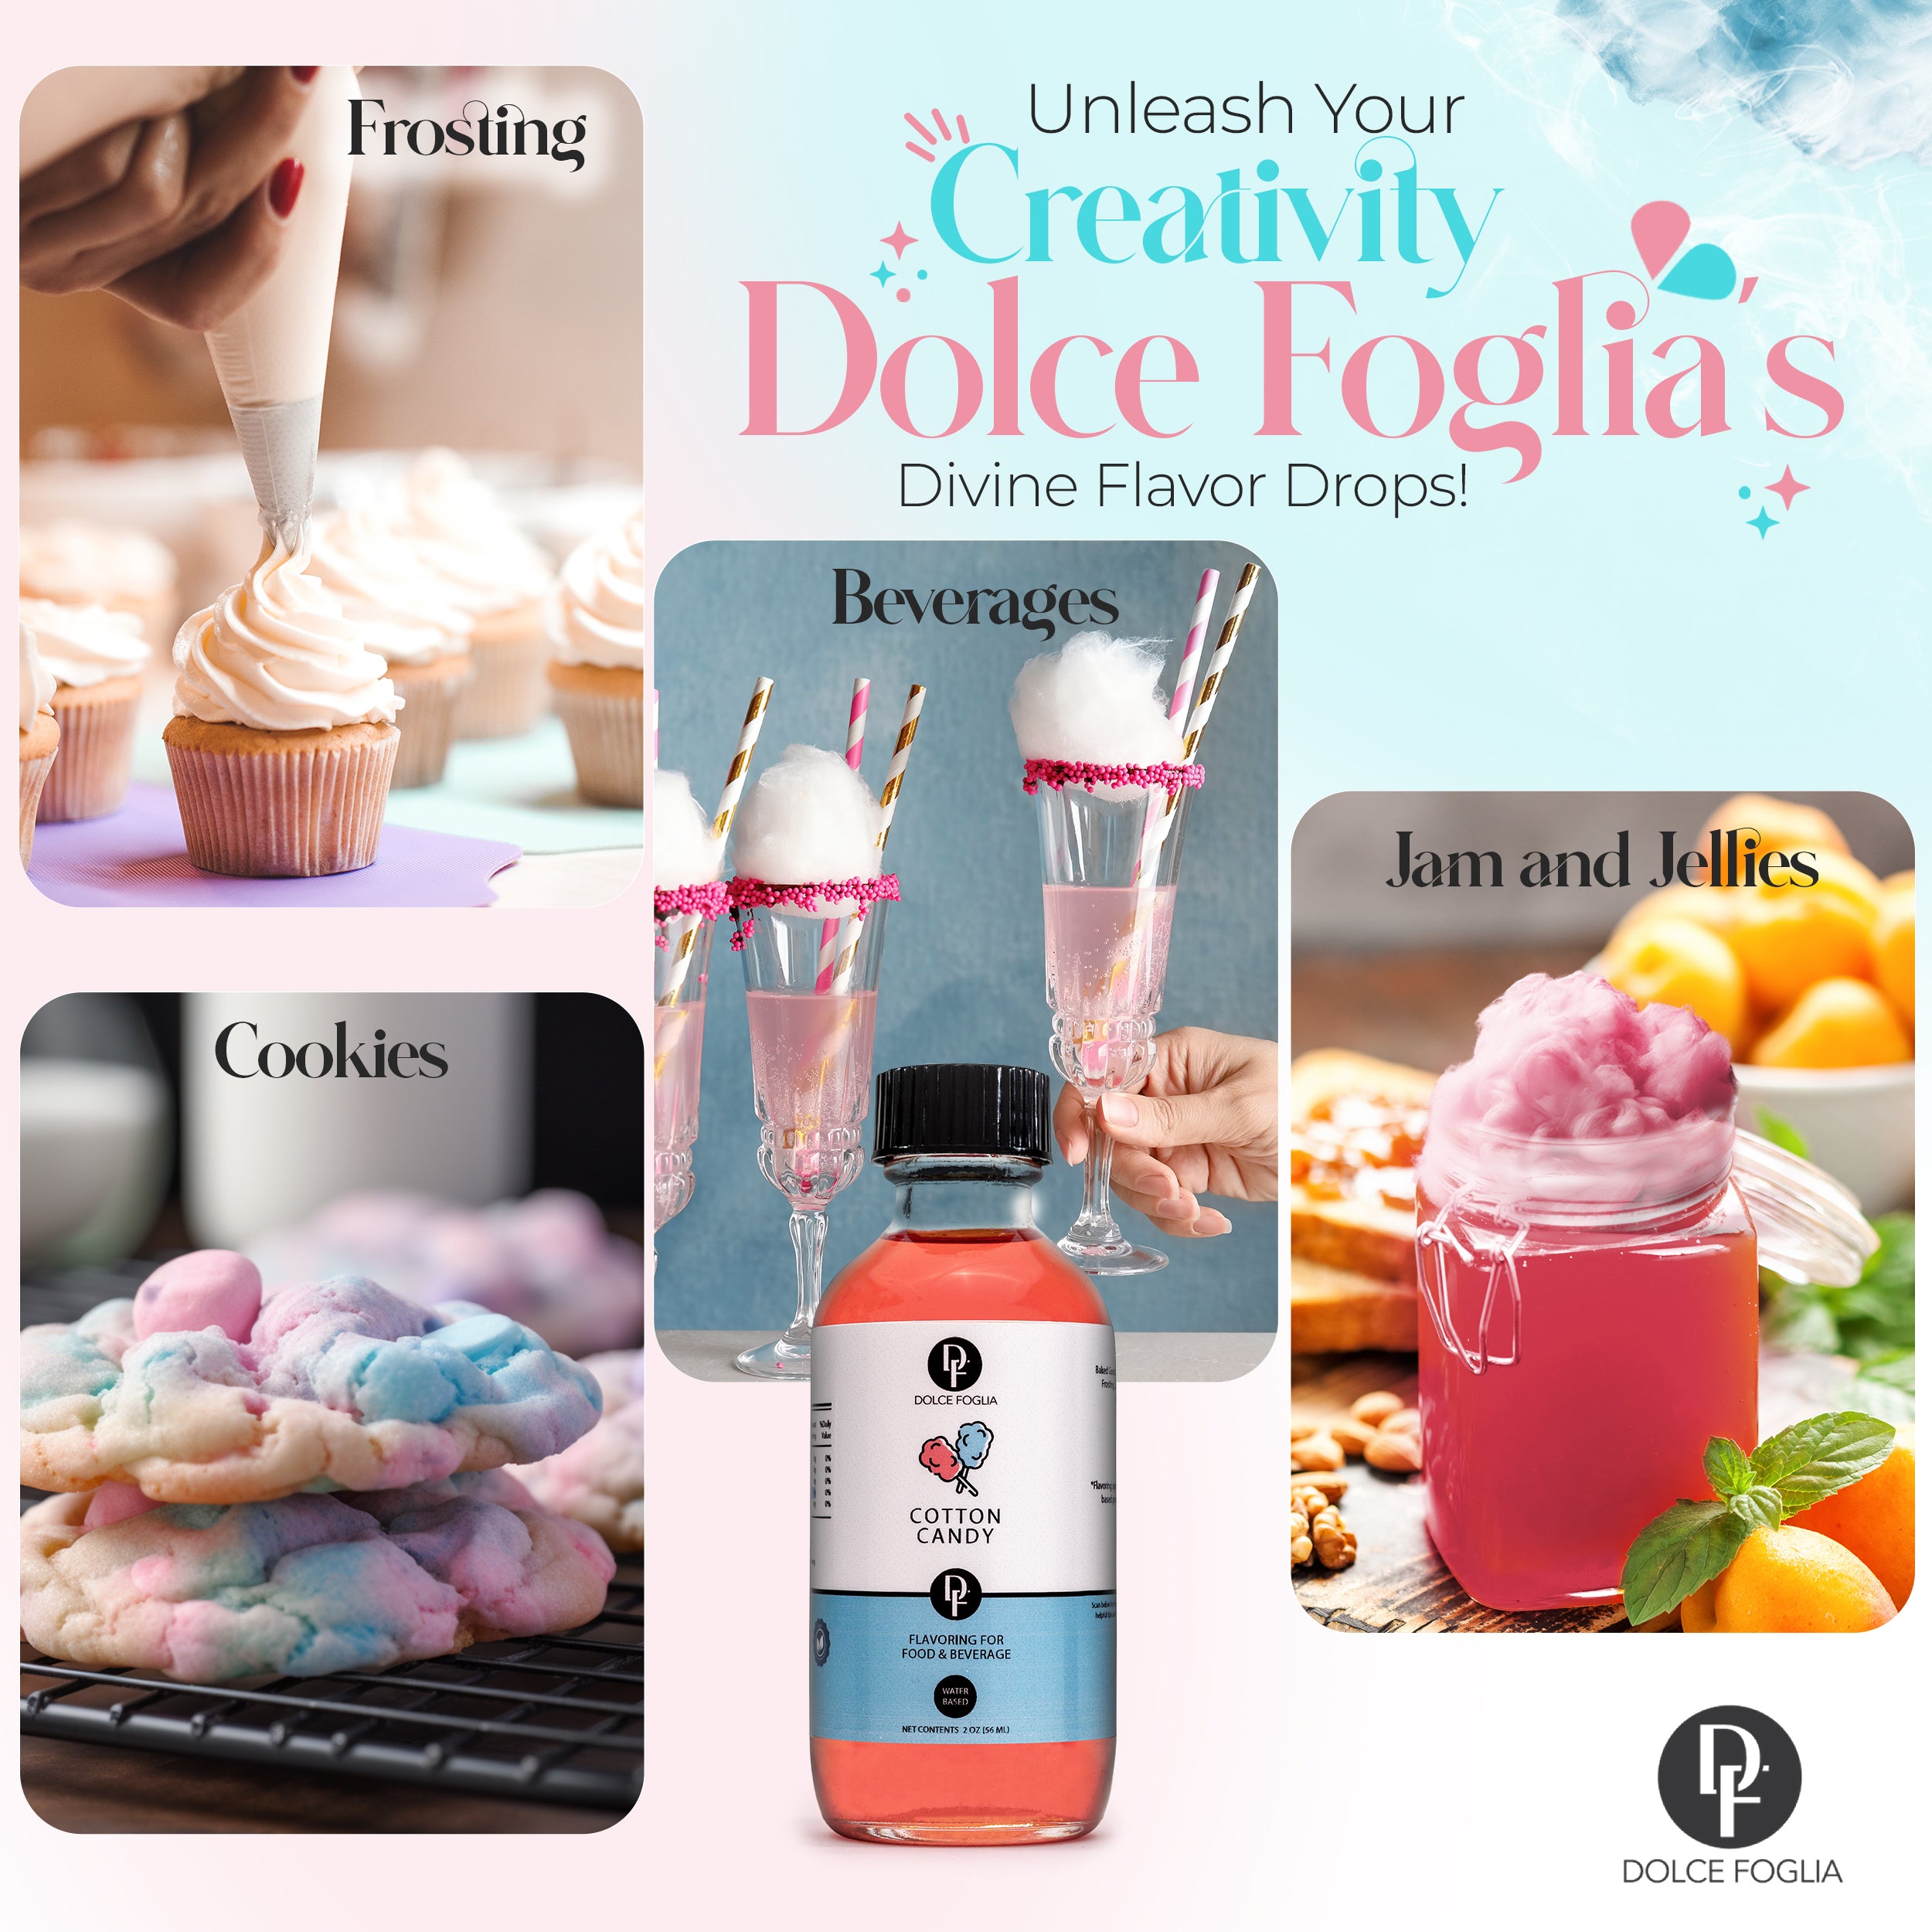  Dolce Foglia Baker's Dozen Pack - 2 Oz.x13 - 1 Free Flavor -  Multipurpose Flavoring Oil for Candy Making, Extracts and Flavorings for  Baking, Lip Balm, Ice Cream, Ultra Concentrated Ingredients 